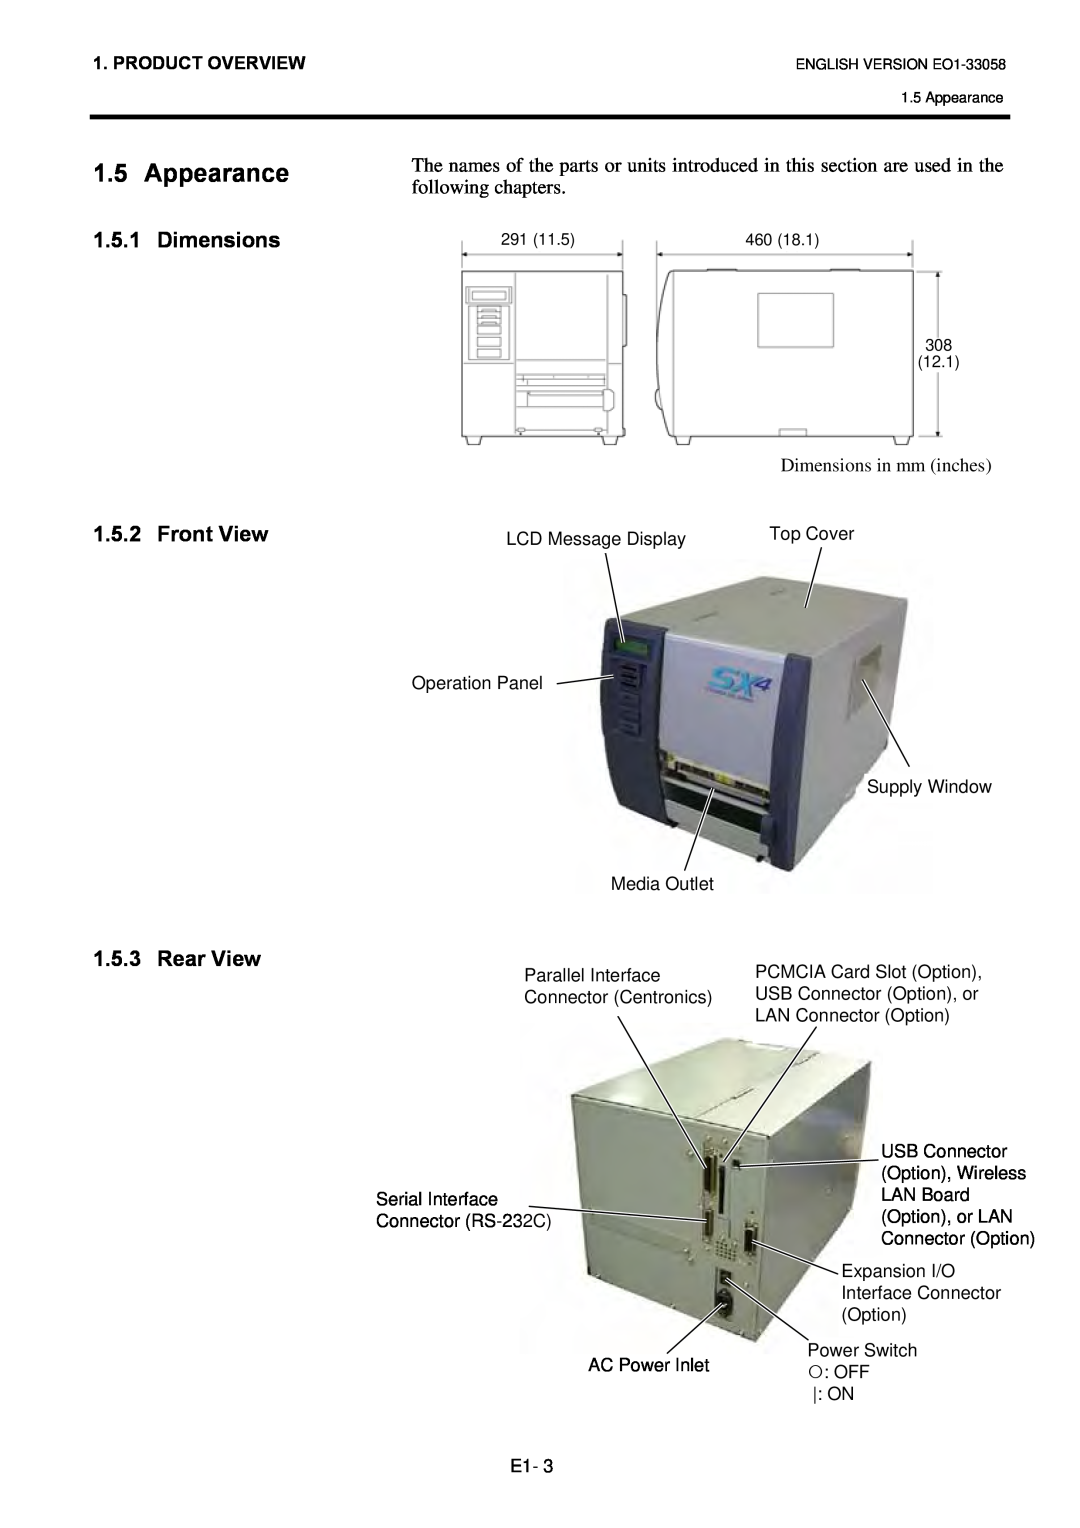 Toshiba B-SX4T owner manual Appearance, 1.5.1, Dimensions, Front View, Rear View, Product Overview 